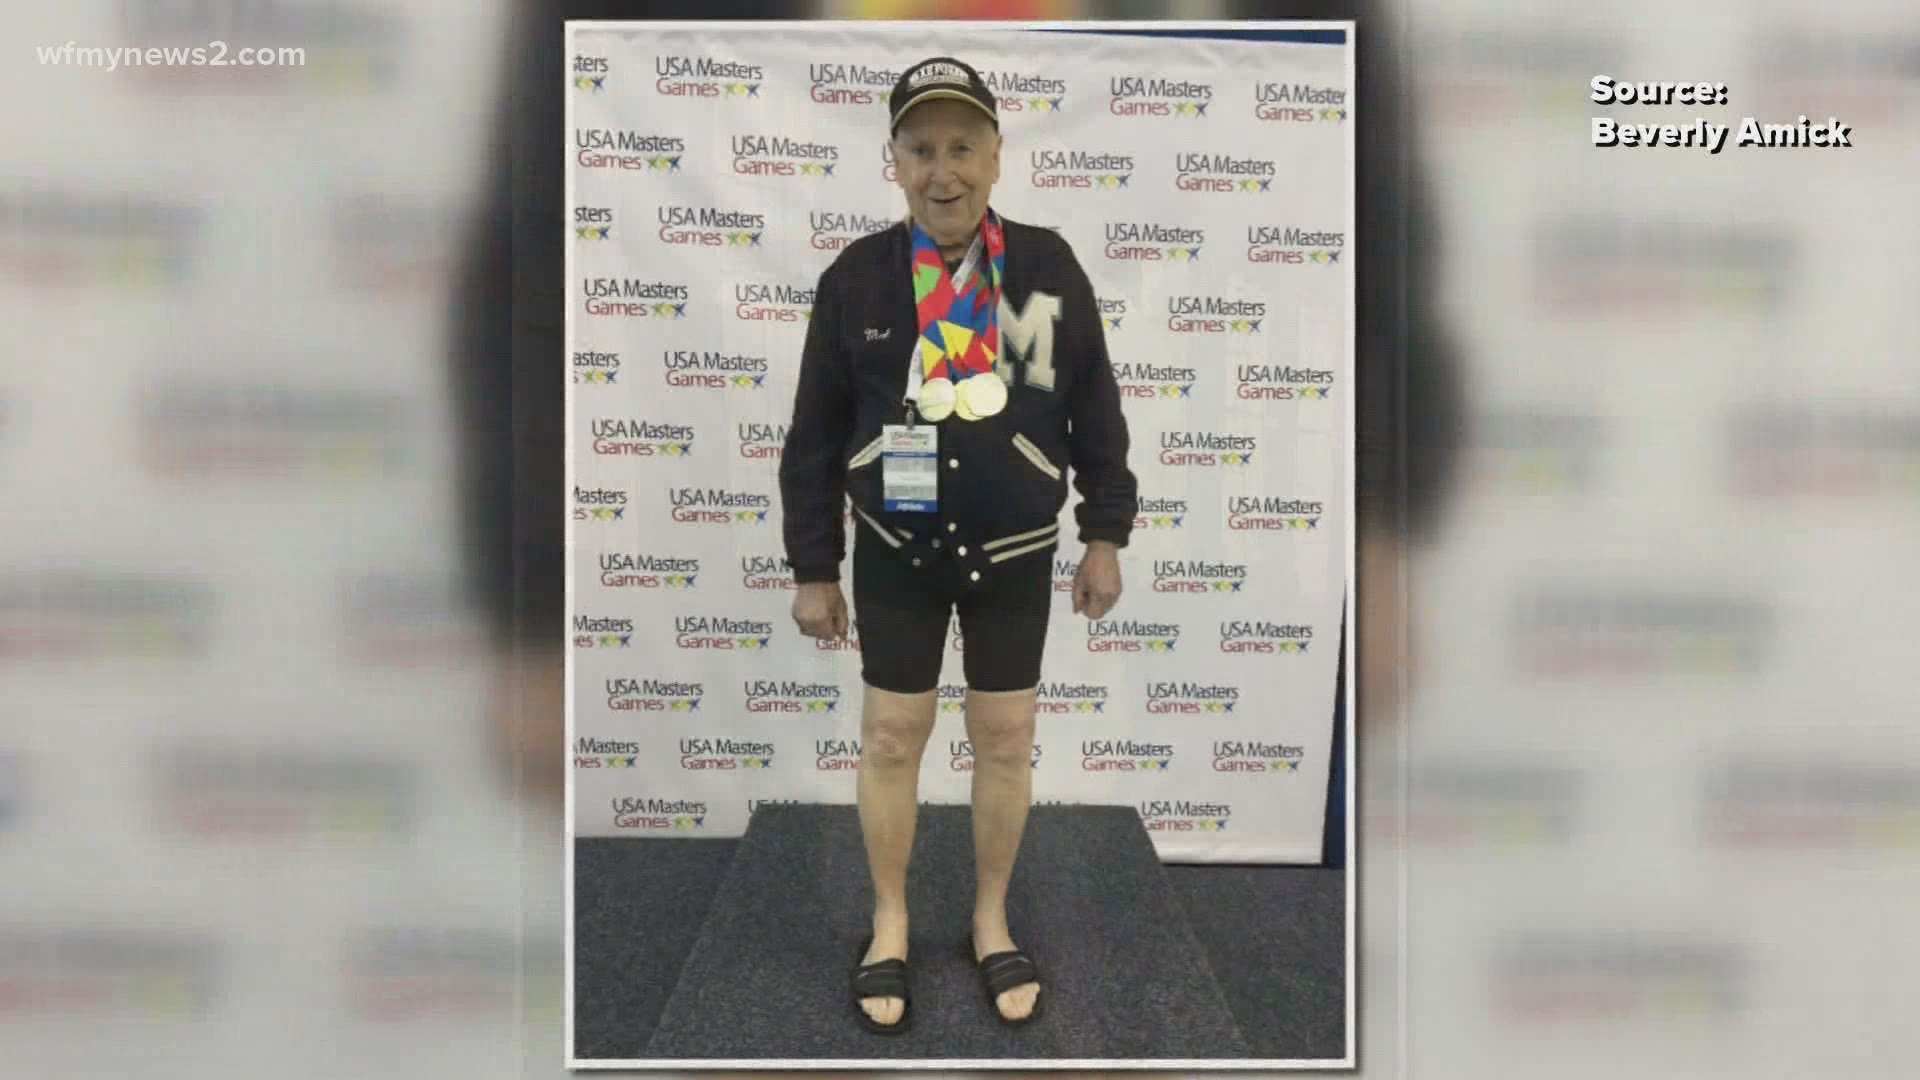 92-year-old Mal Osborn lost his jacket a month ago. The search to find it spread all across social media.